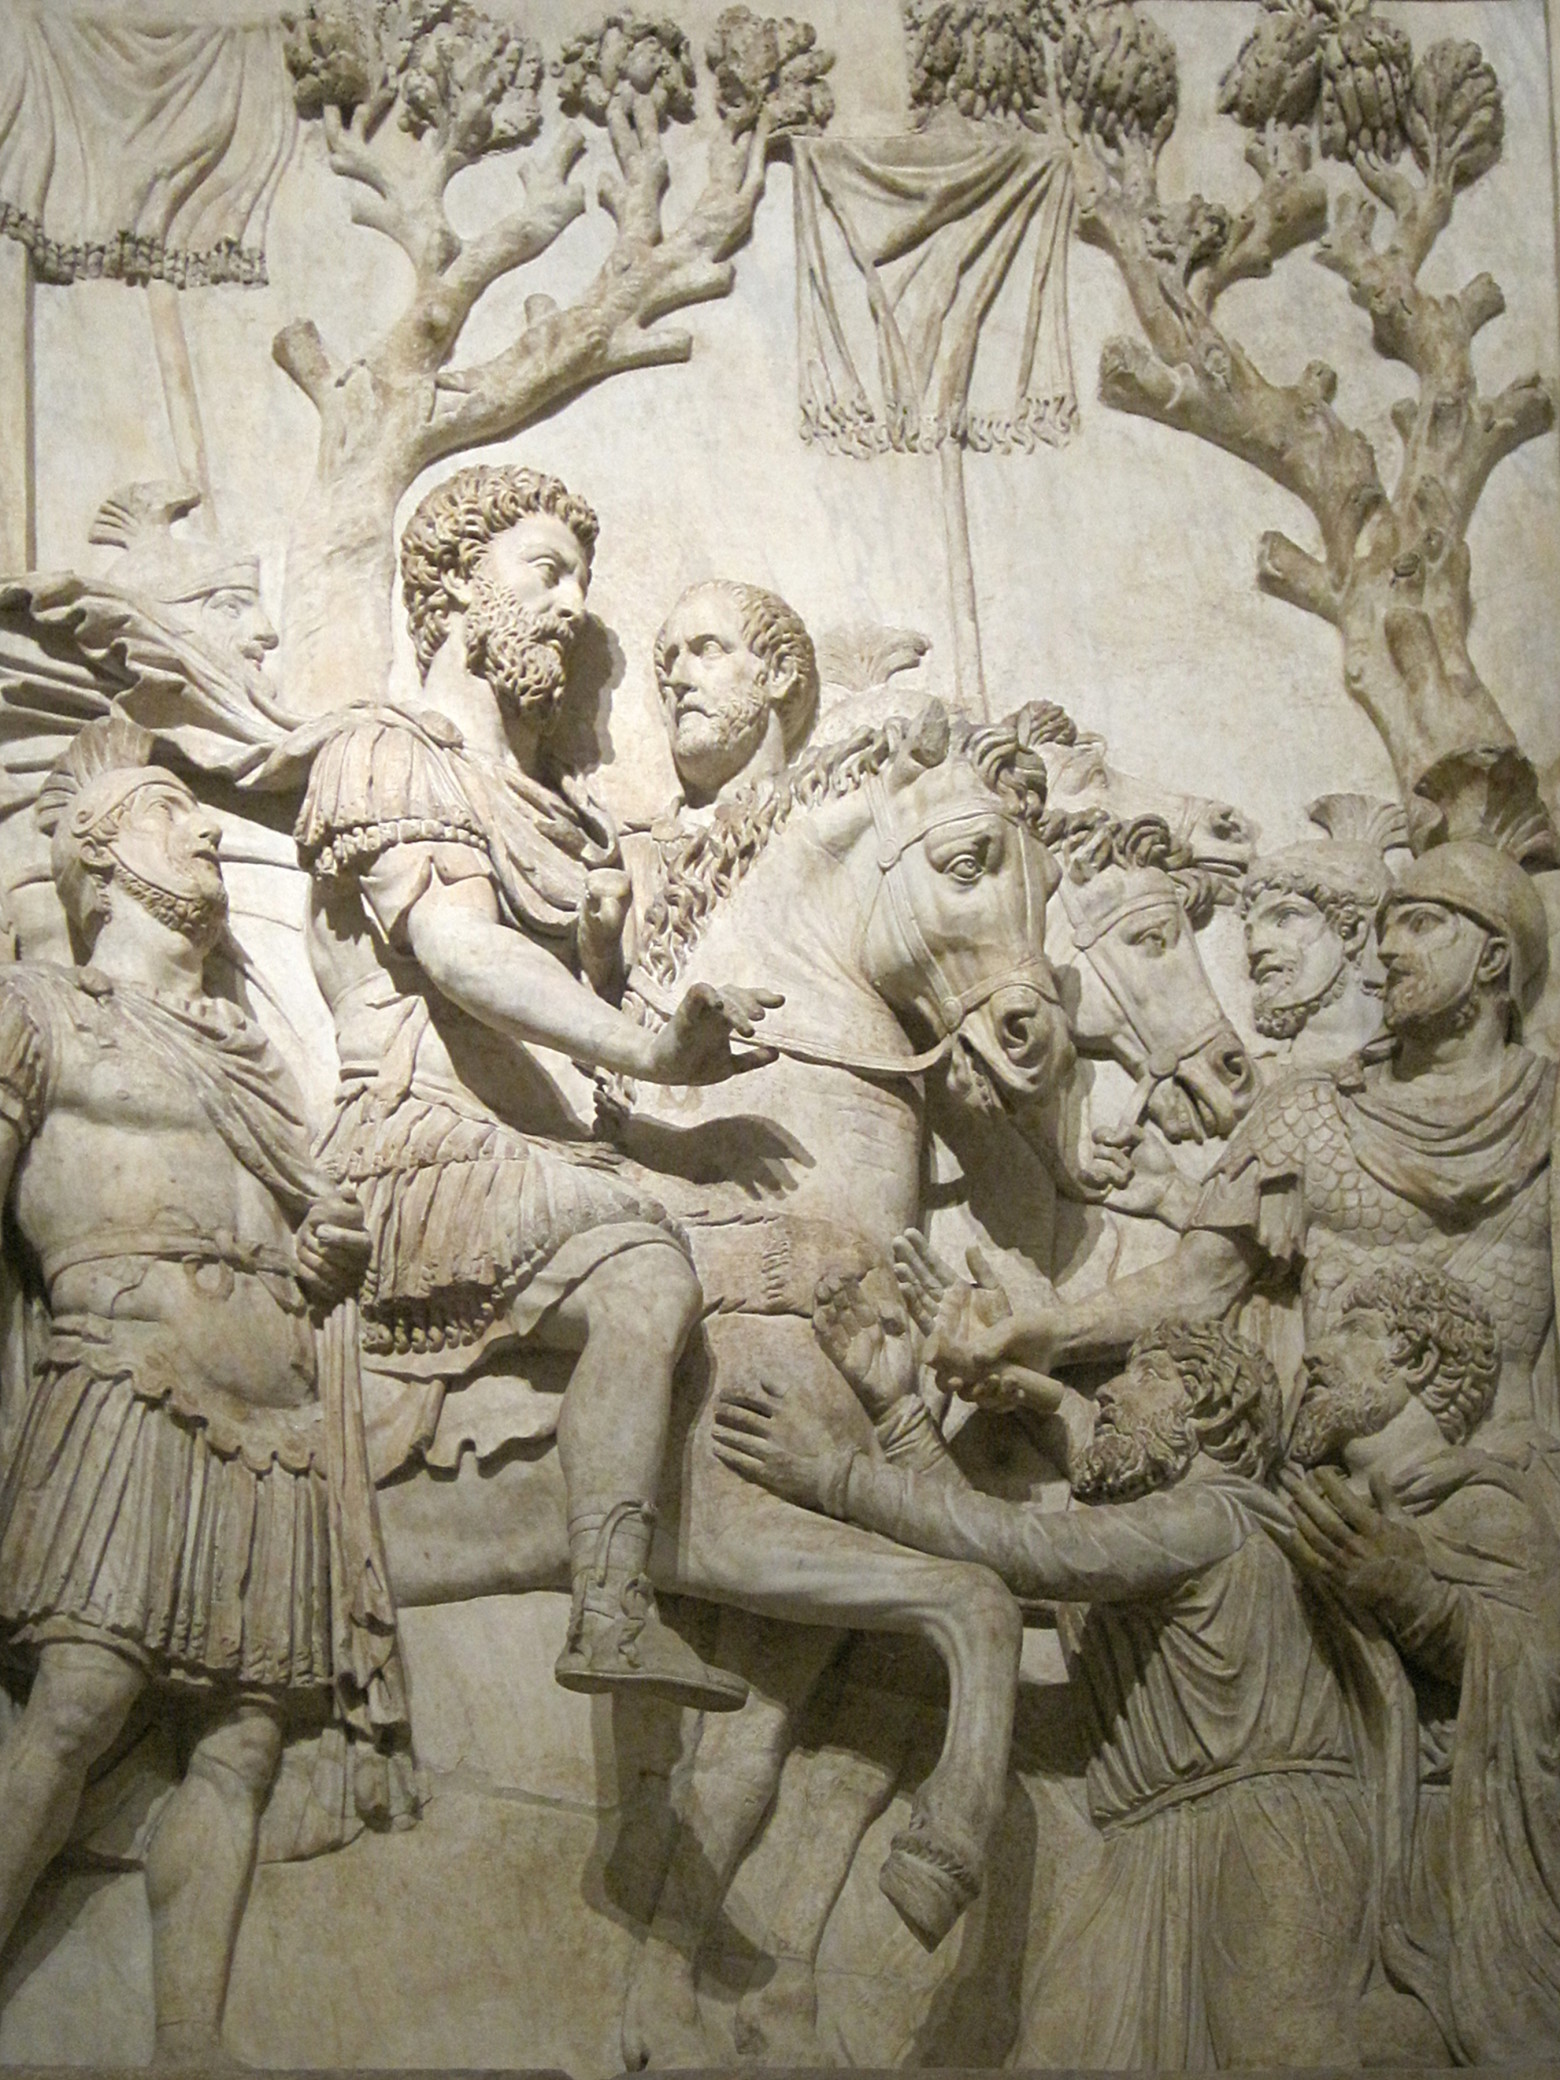 Marcus Aurelius receiving the submission of the vanquished, with raised vexillum standards.